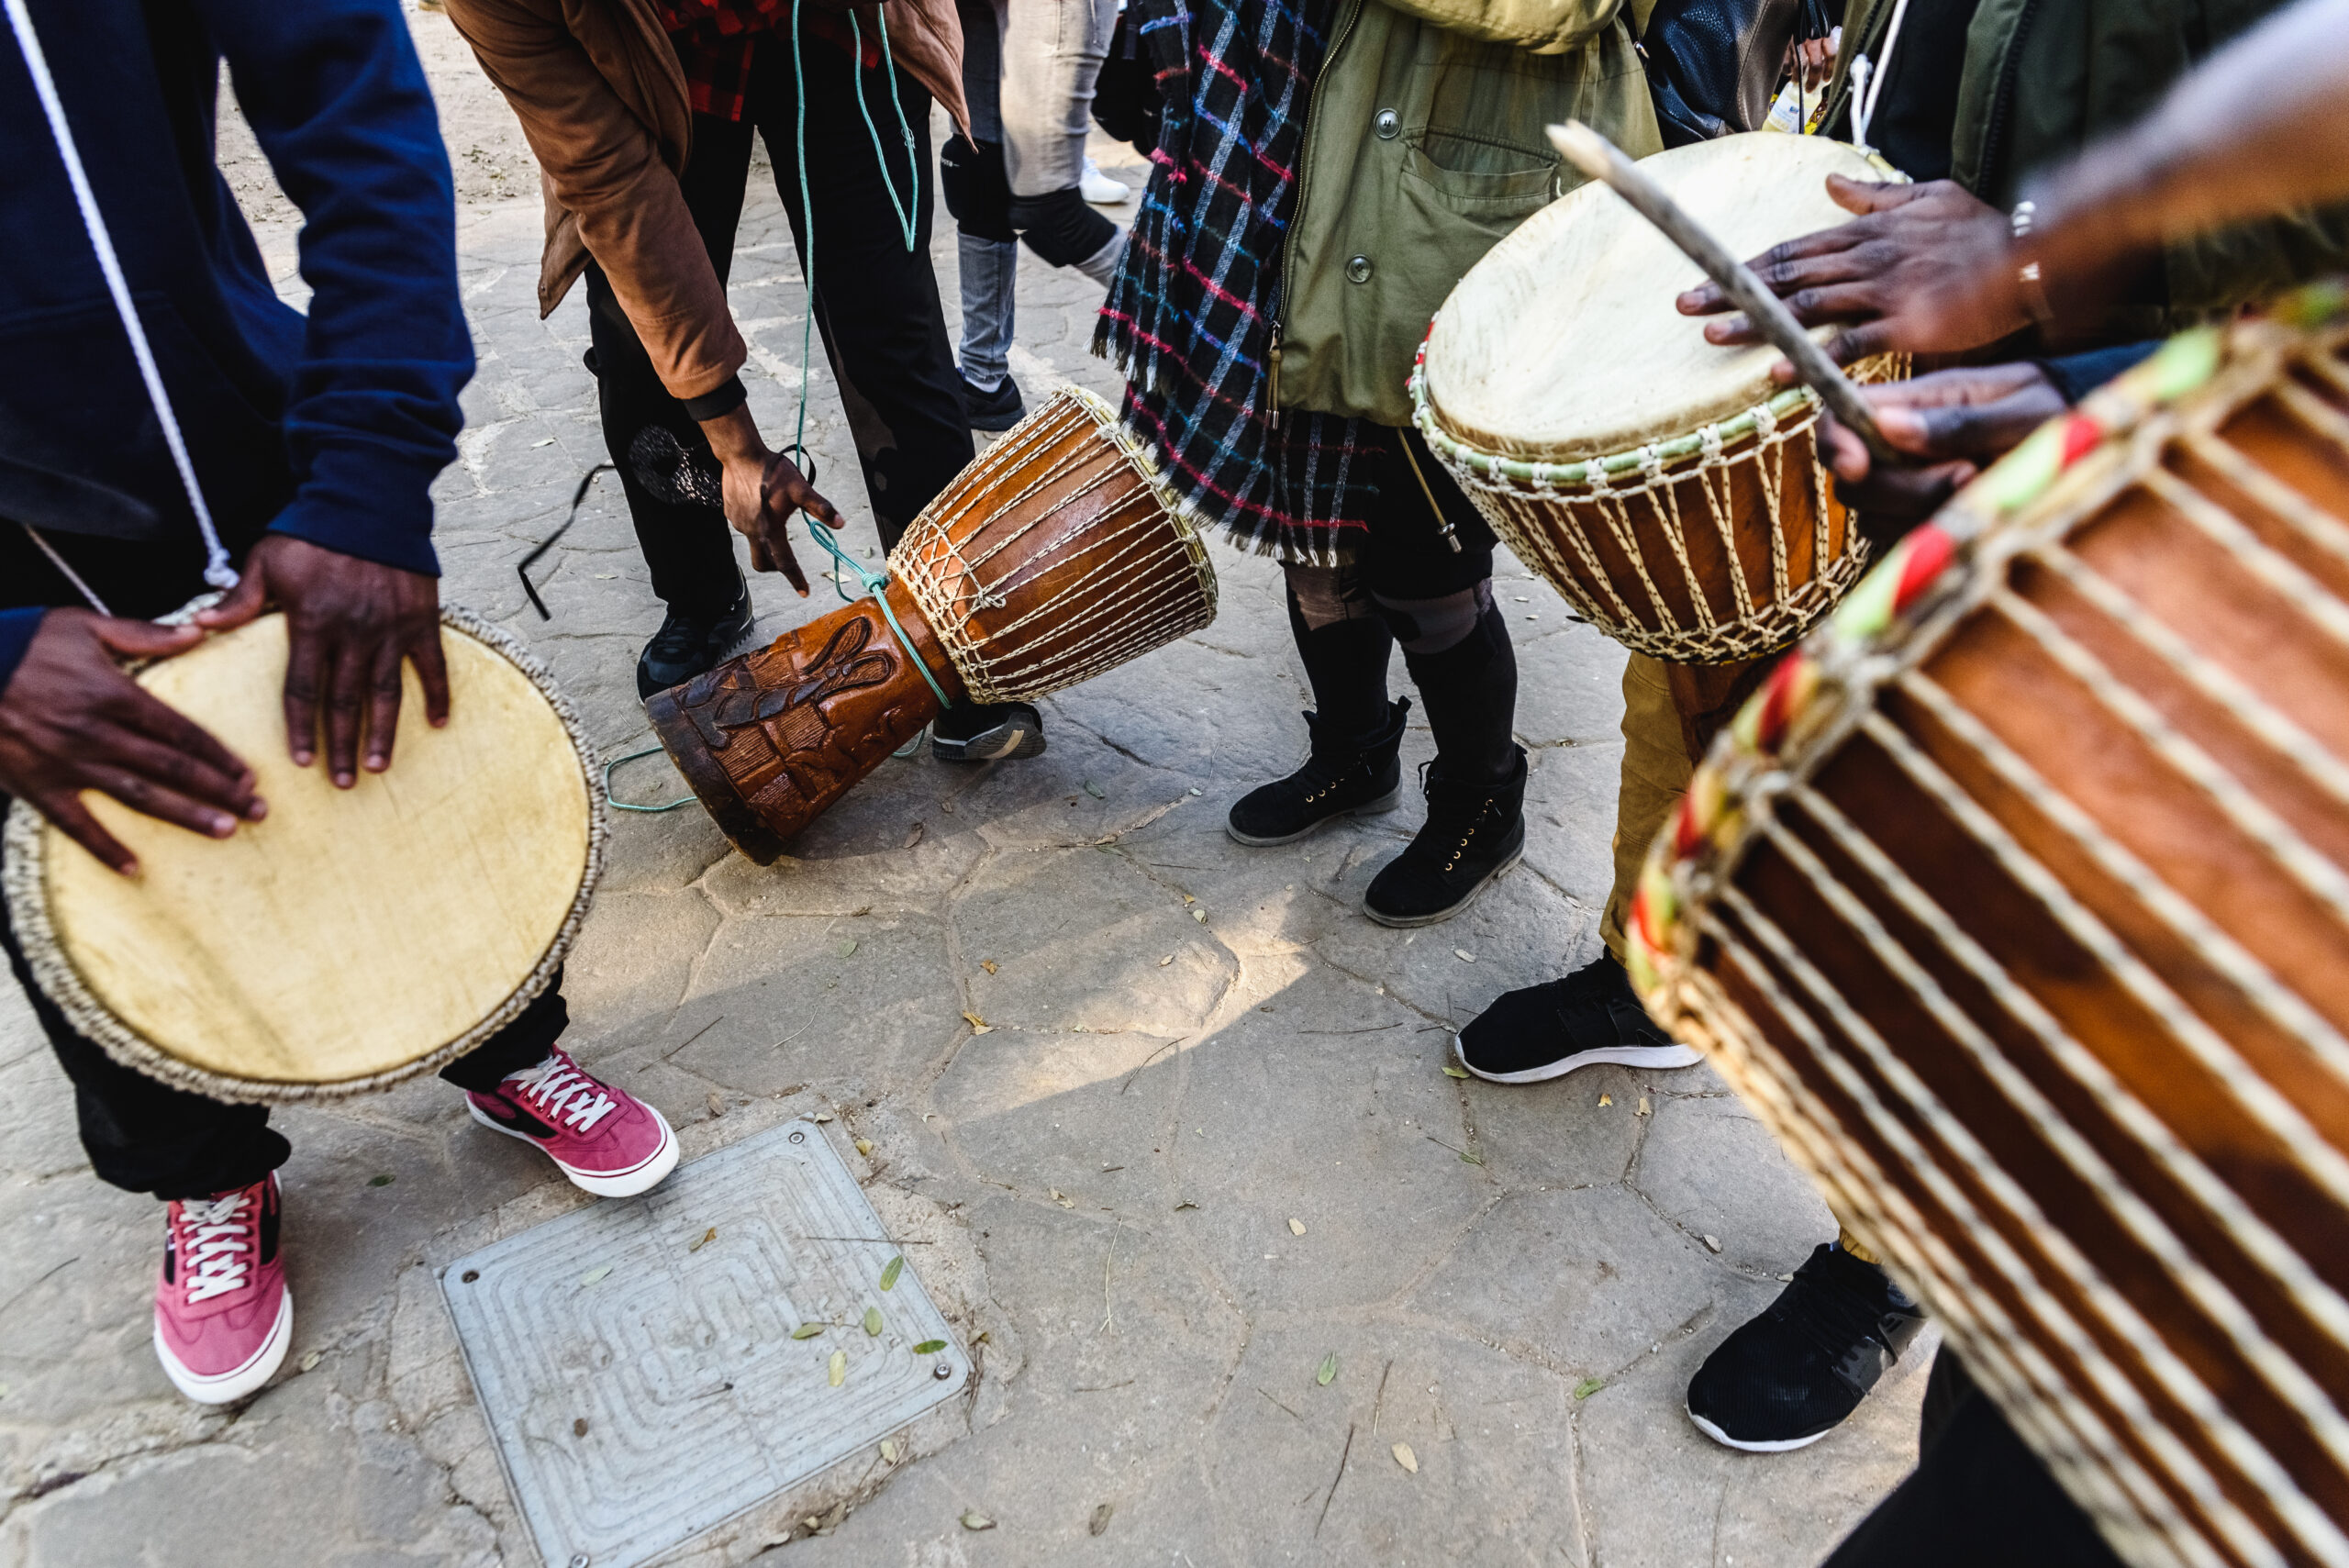 African drummers blowing their bongos on the street.